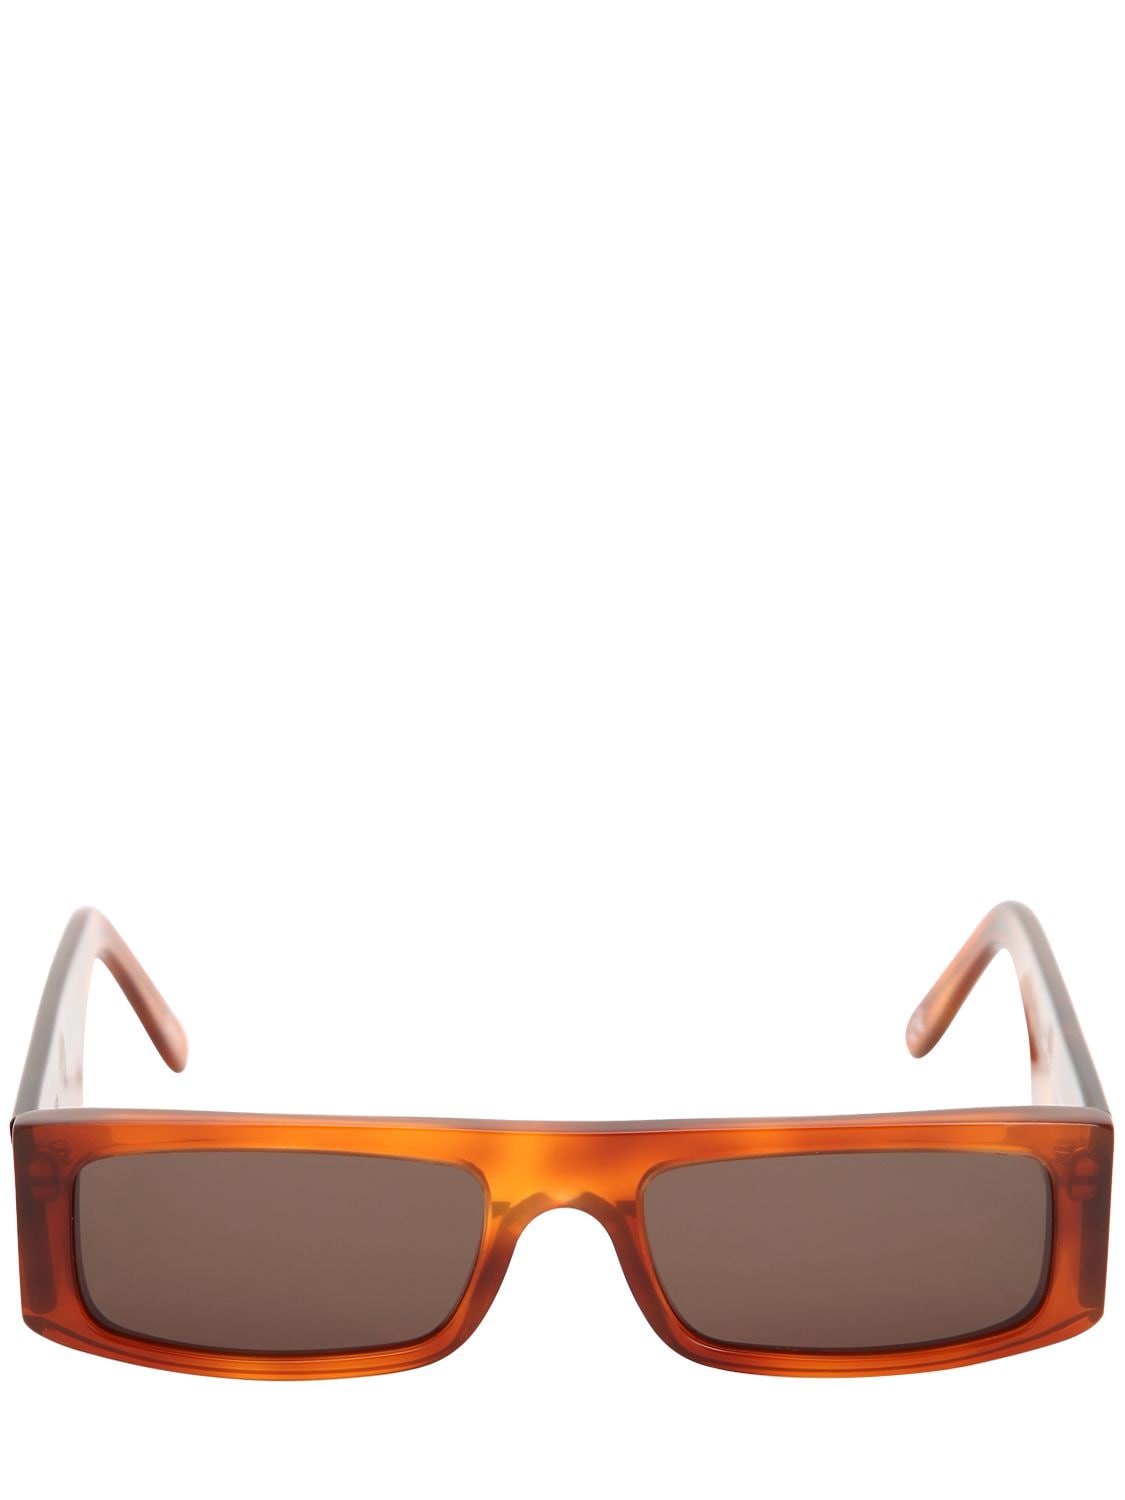 Andy Wolf HUME SUNGLASSES